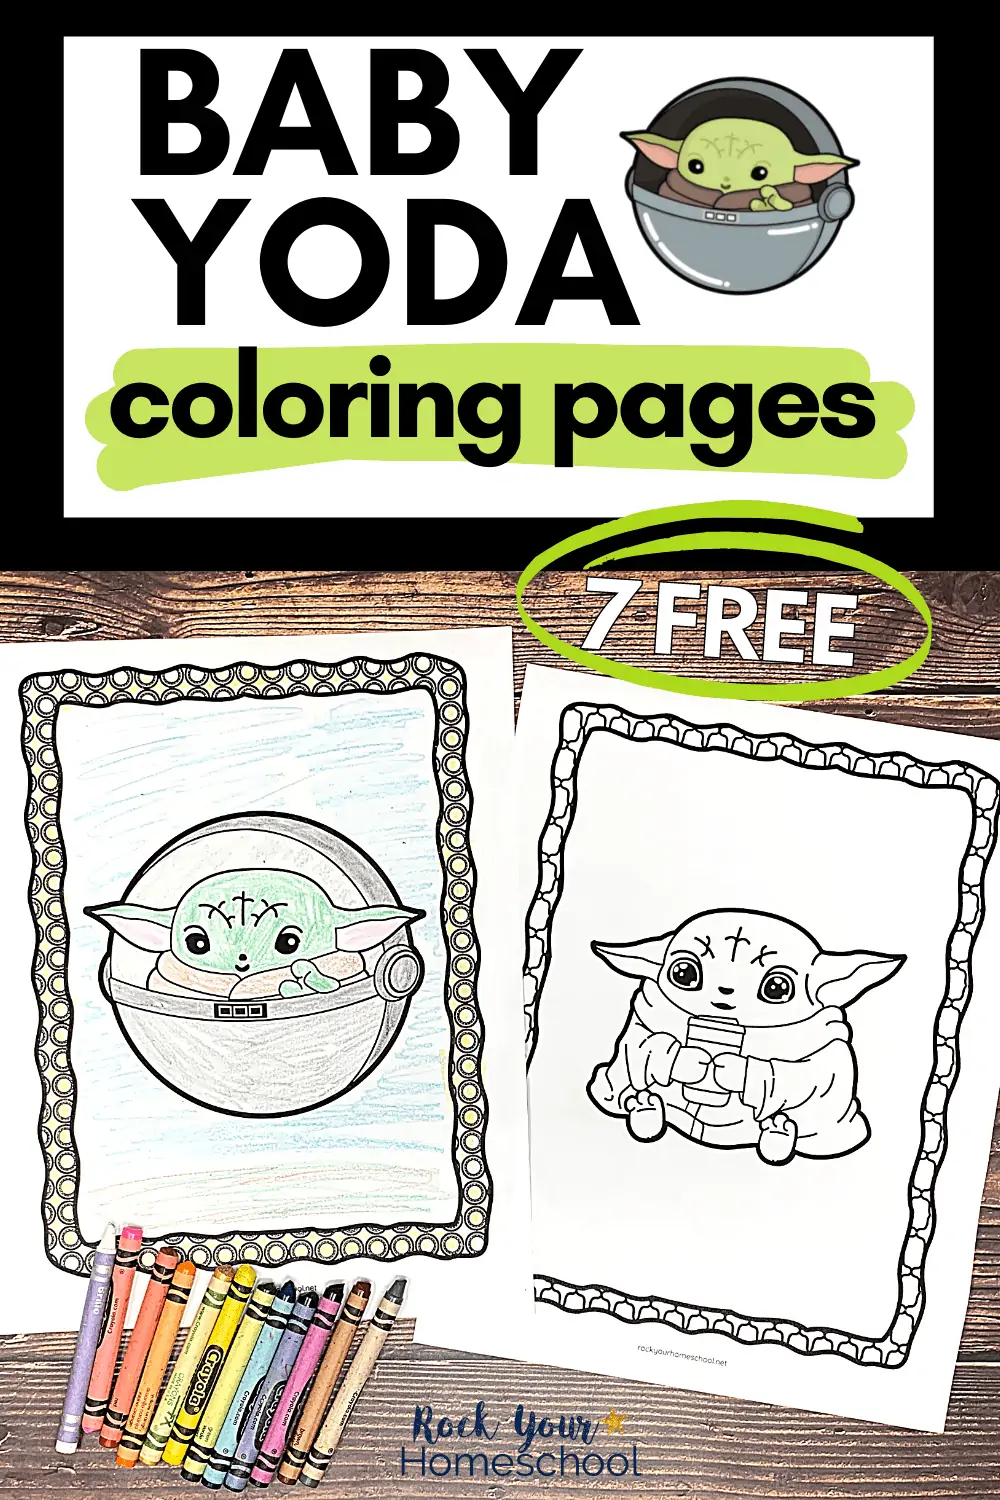 Baby Yoda coloring pages with Baby Yoda in floating pod and Baby Yoda holding cup of soup with crayons on wood background